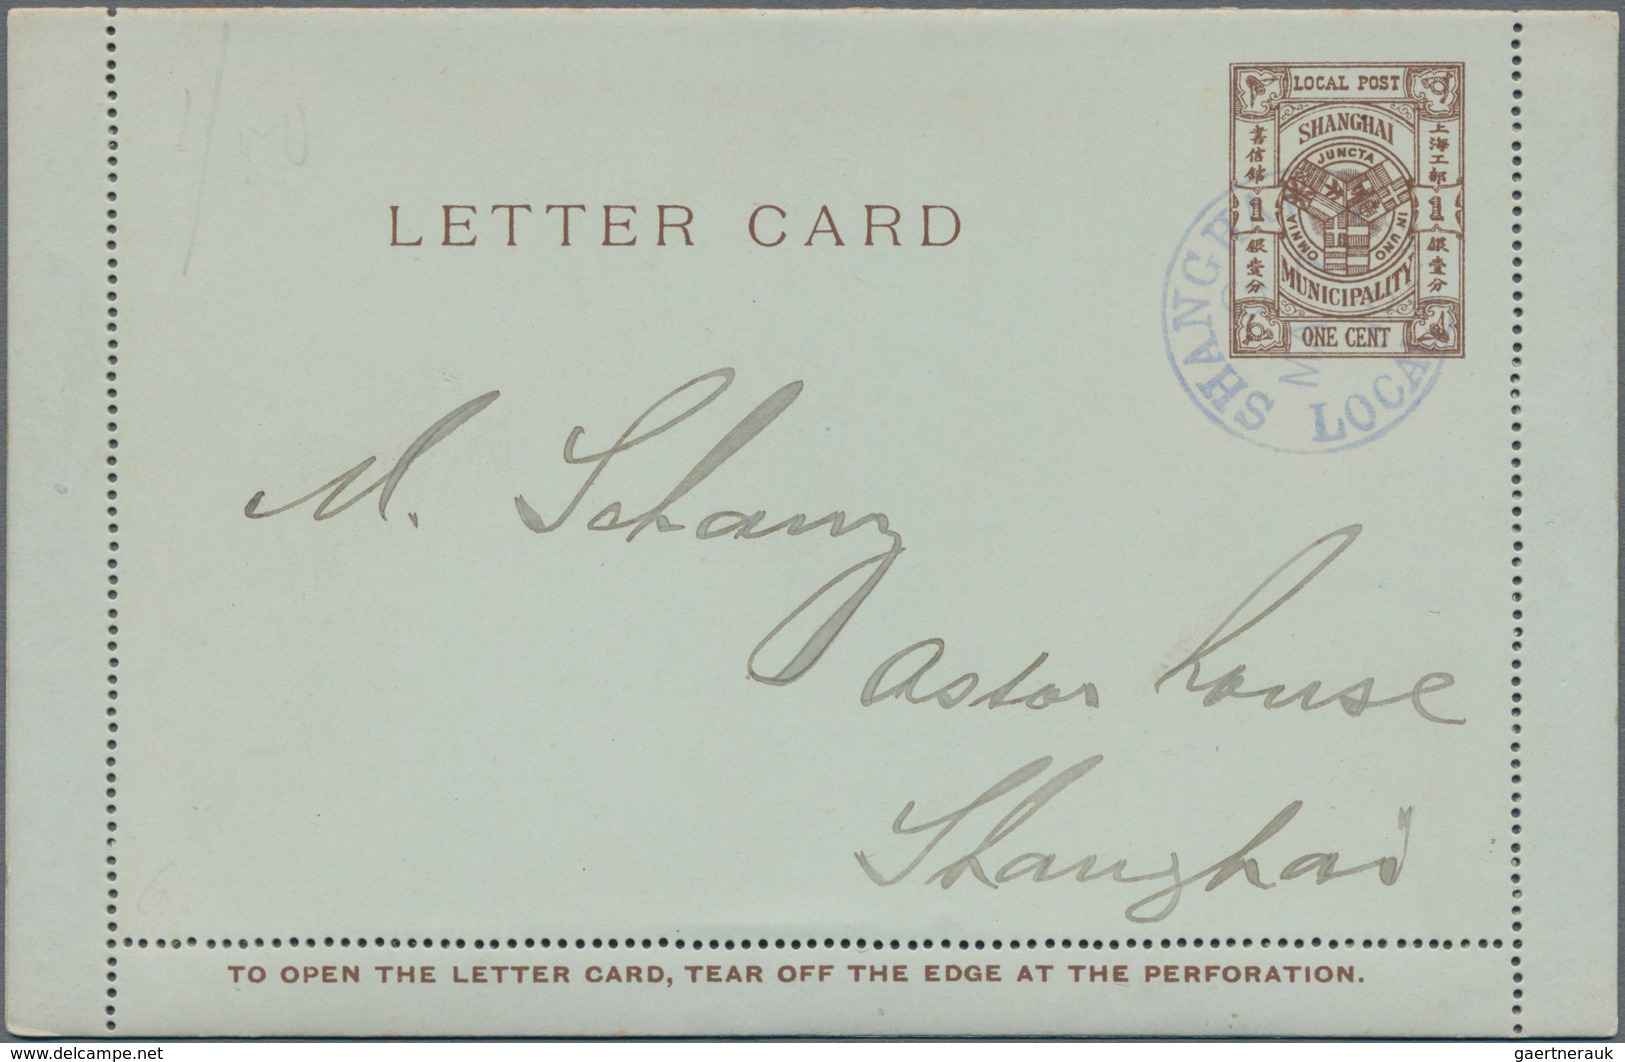 China - Ganzsachen: 1894/1912, group of stationery (5, inc. Shanghai LPO cto/addressed x2) with squa